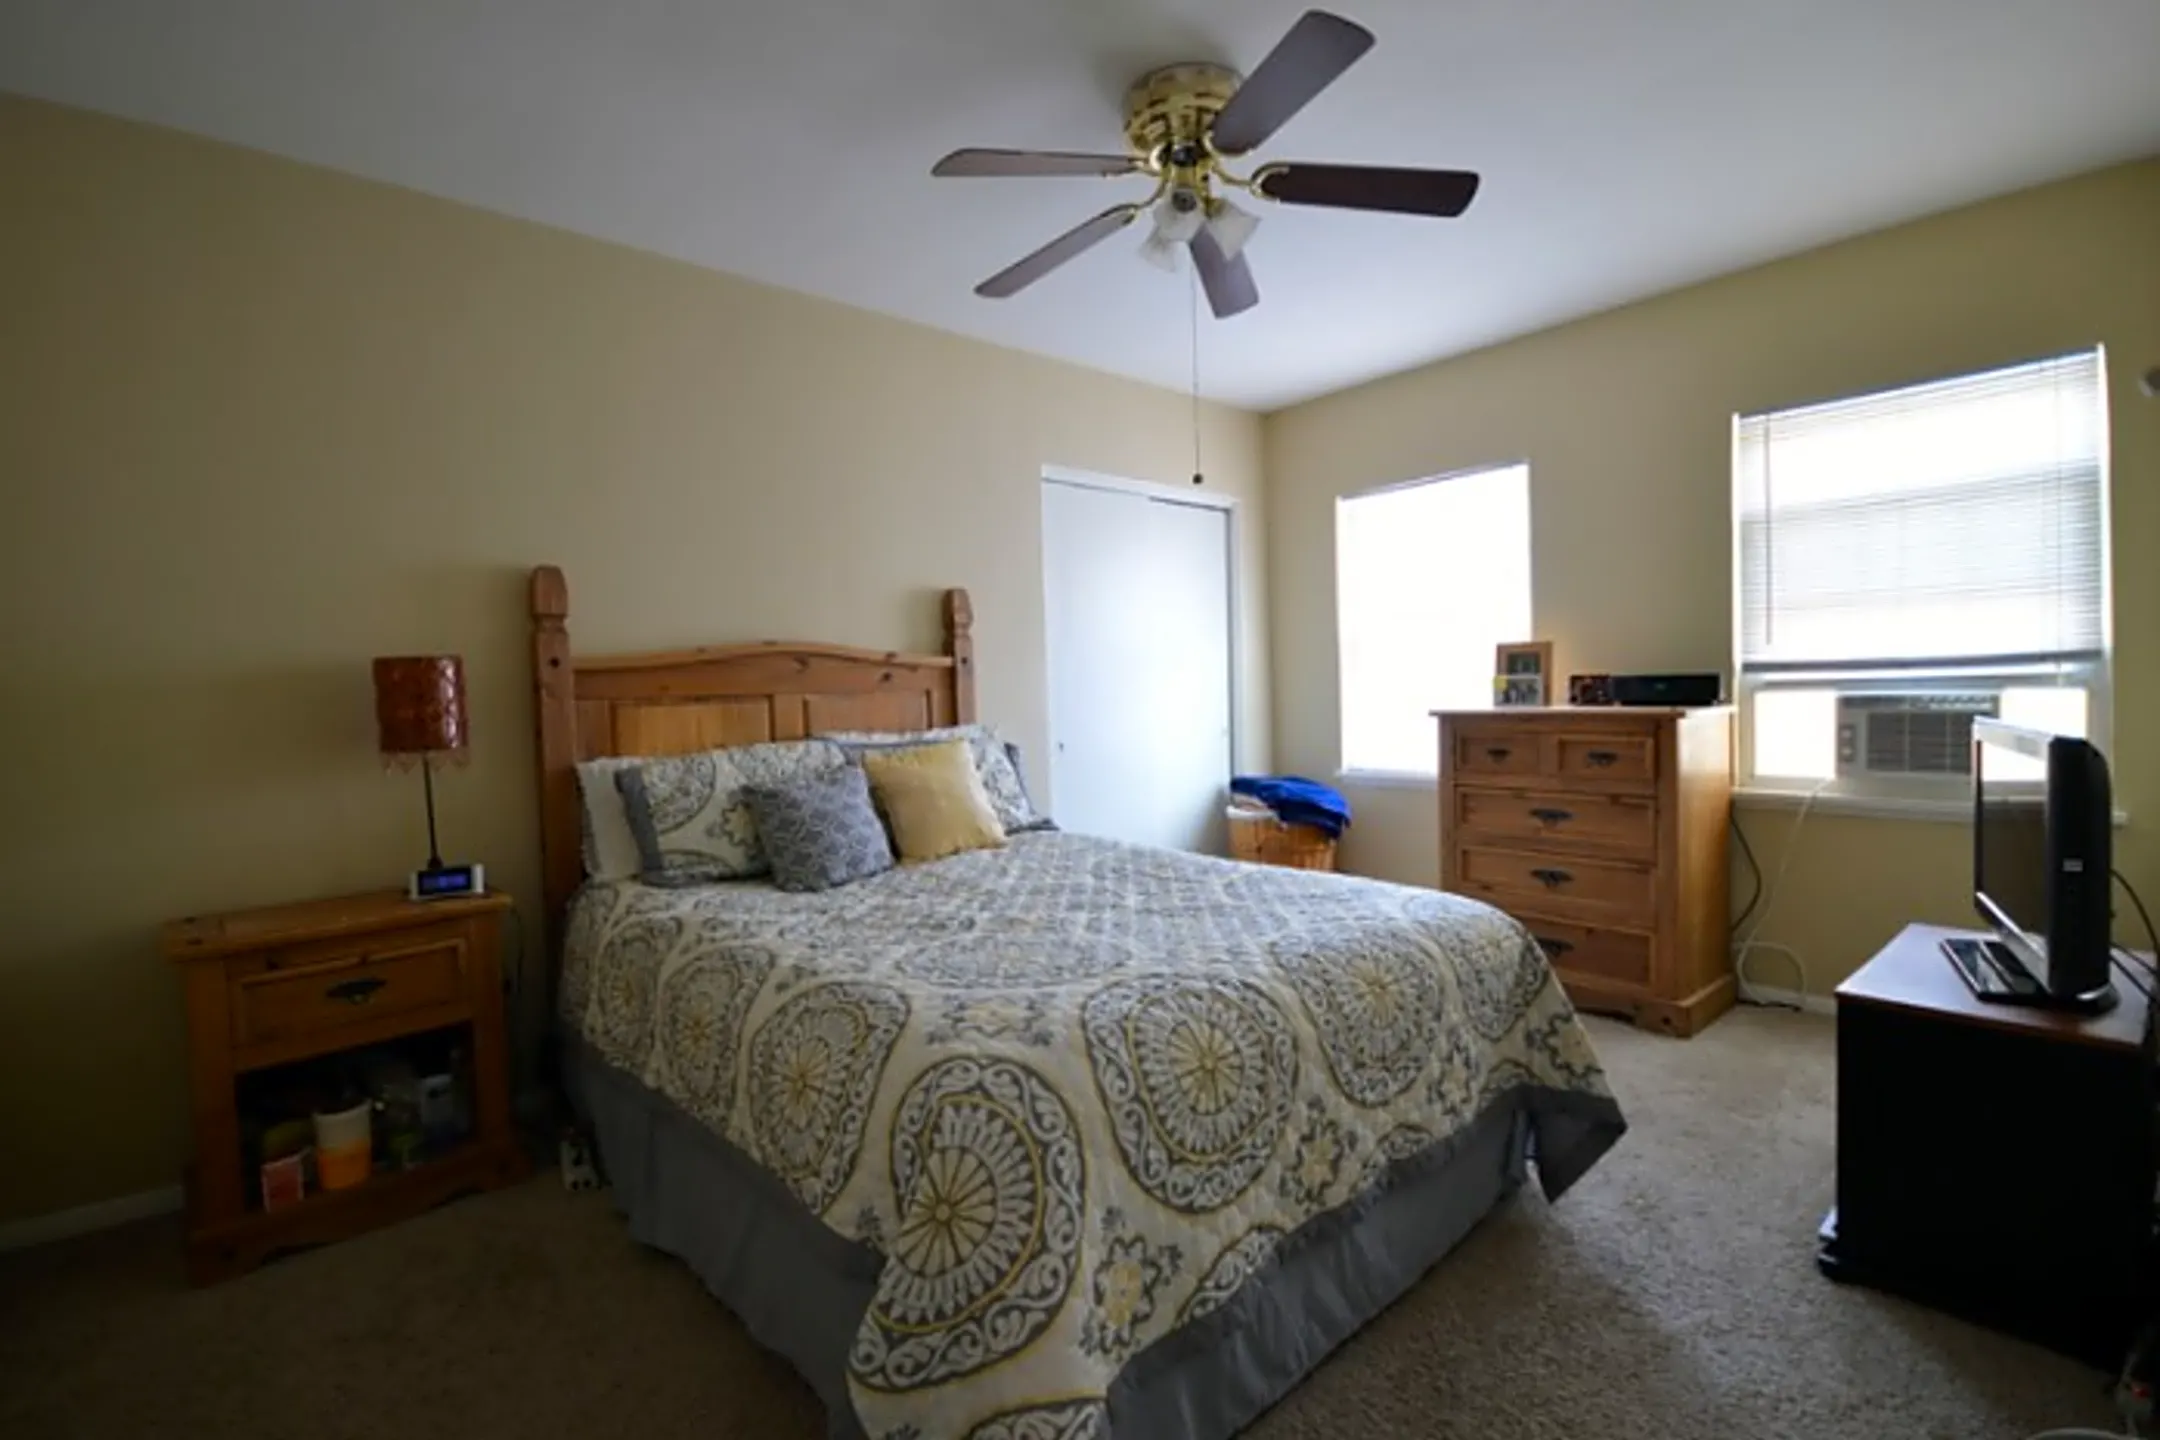 Bedroom - The Westmoreland - Shaker Heights, OH